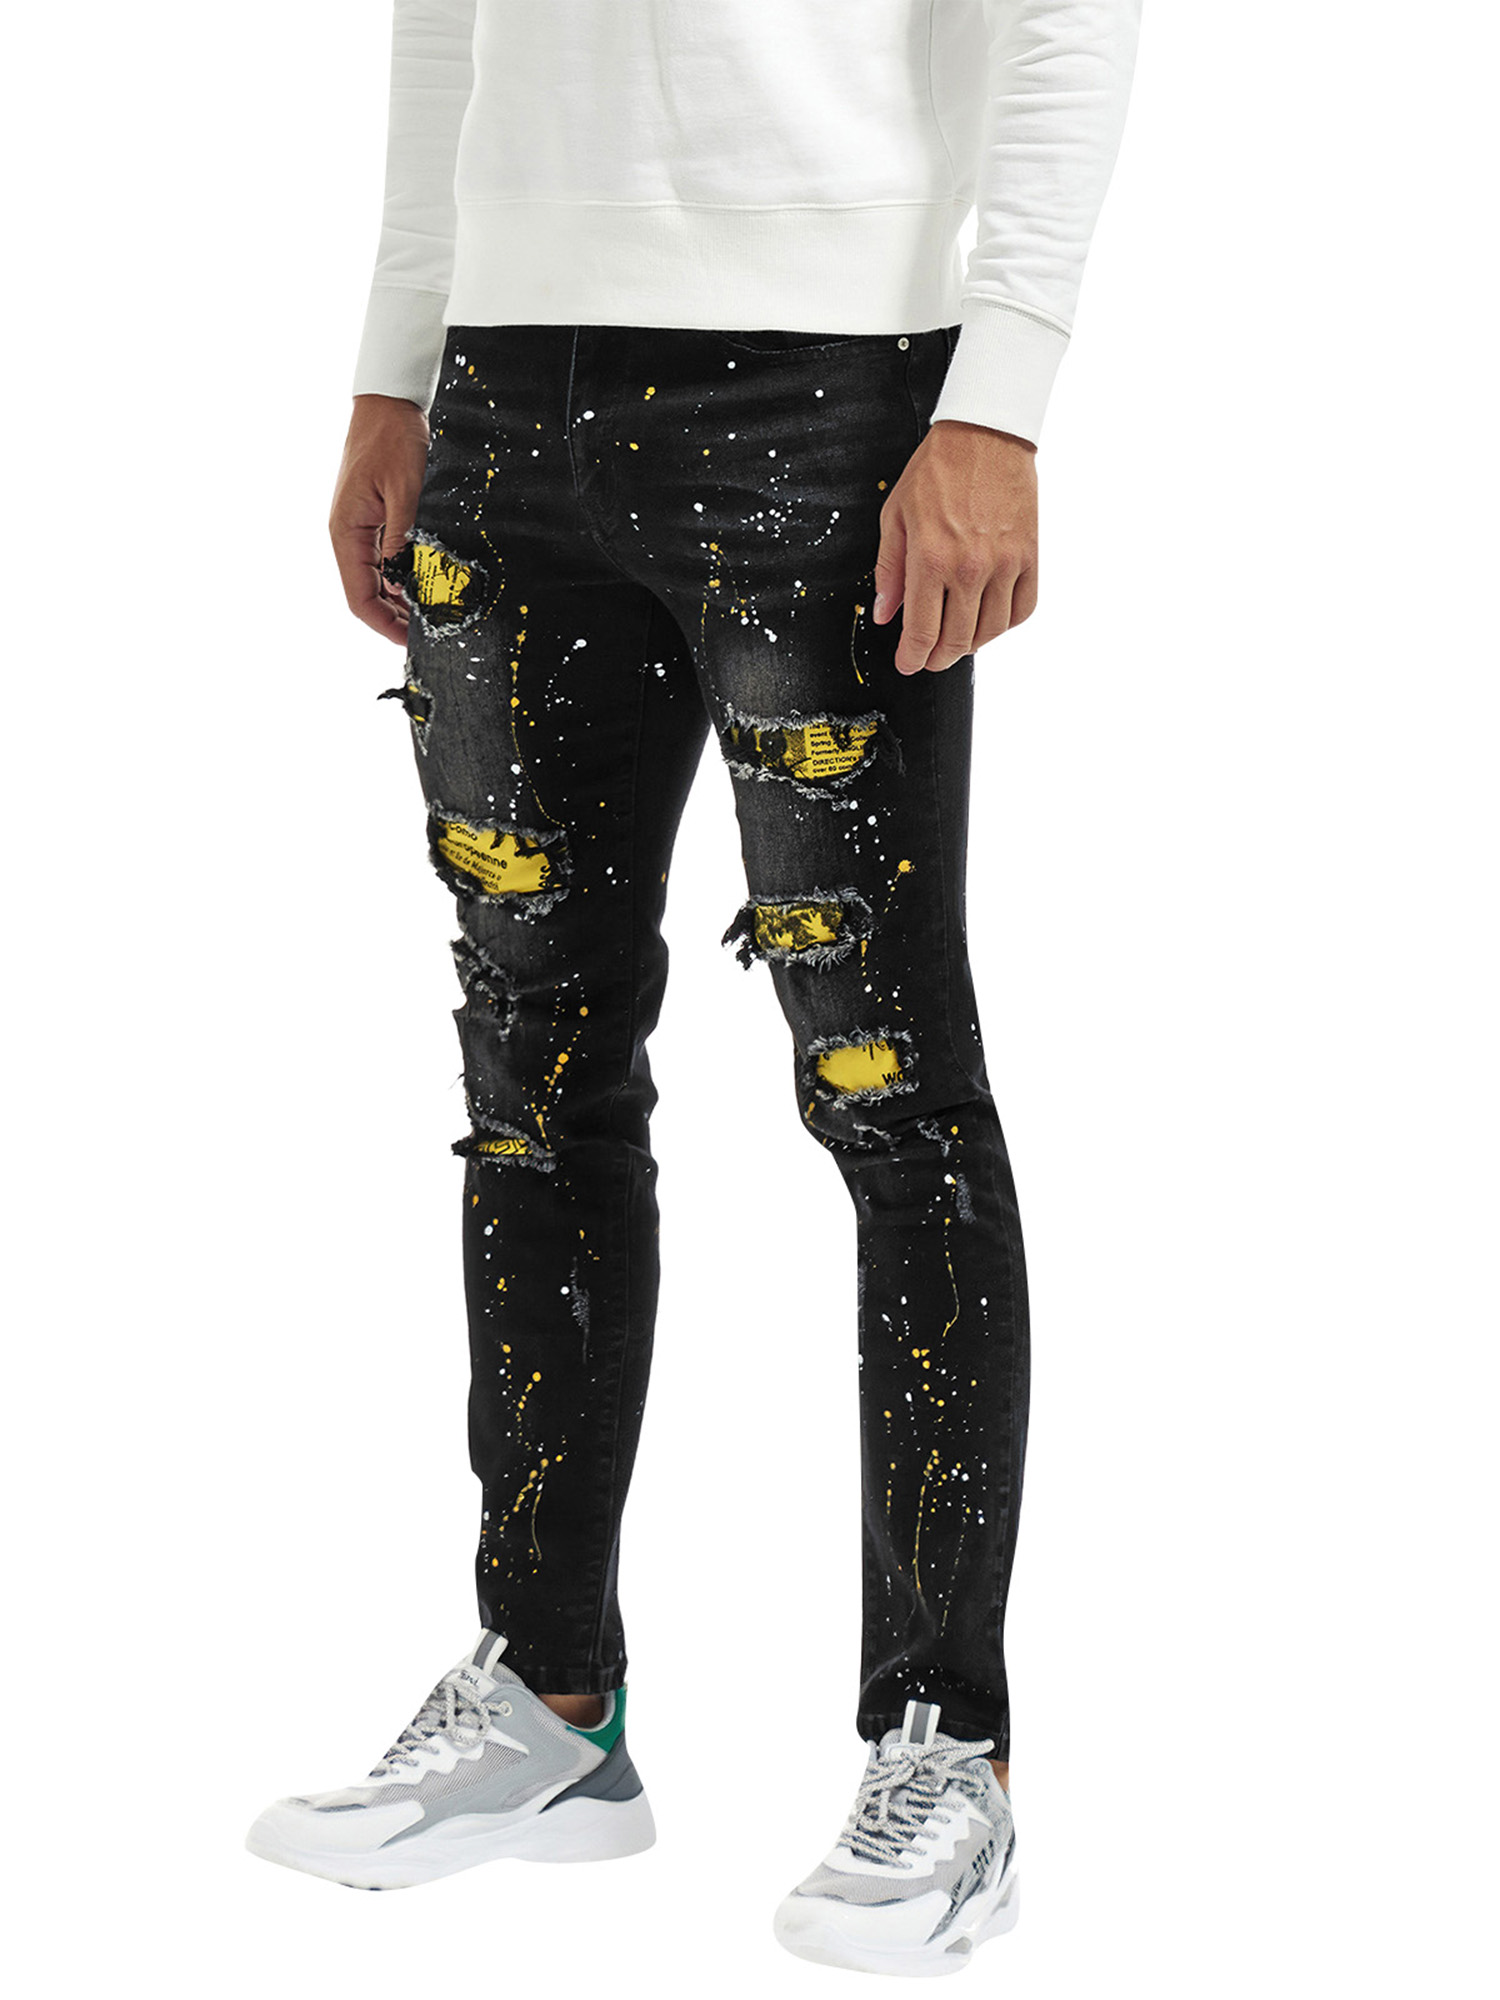 Men Casual Slim Fit Denim Jeans Skinny Distressed Jeans Trousers Motorcycle Rider Hole Pants Jeans - image 5 of 6